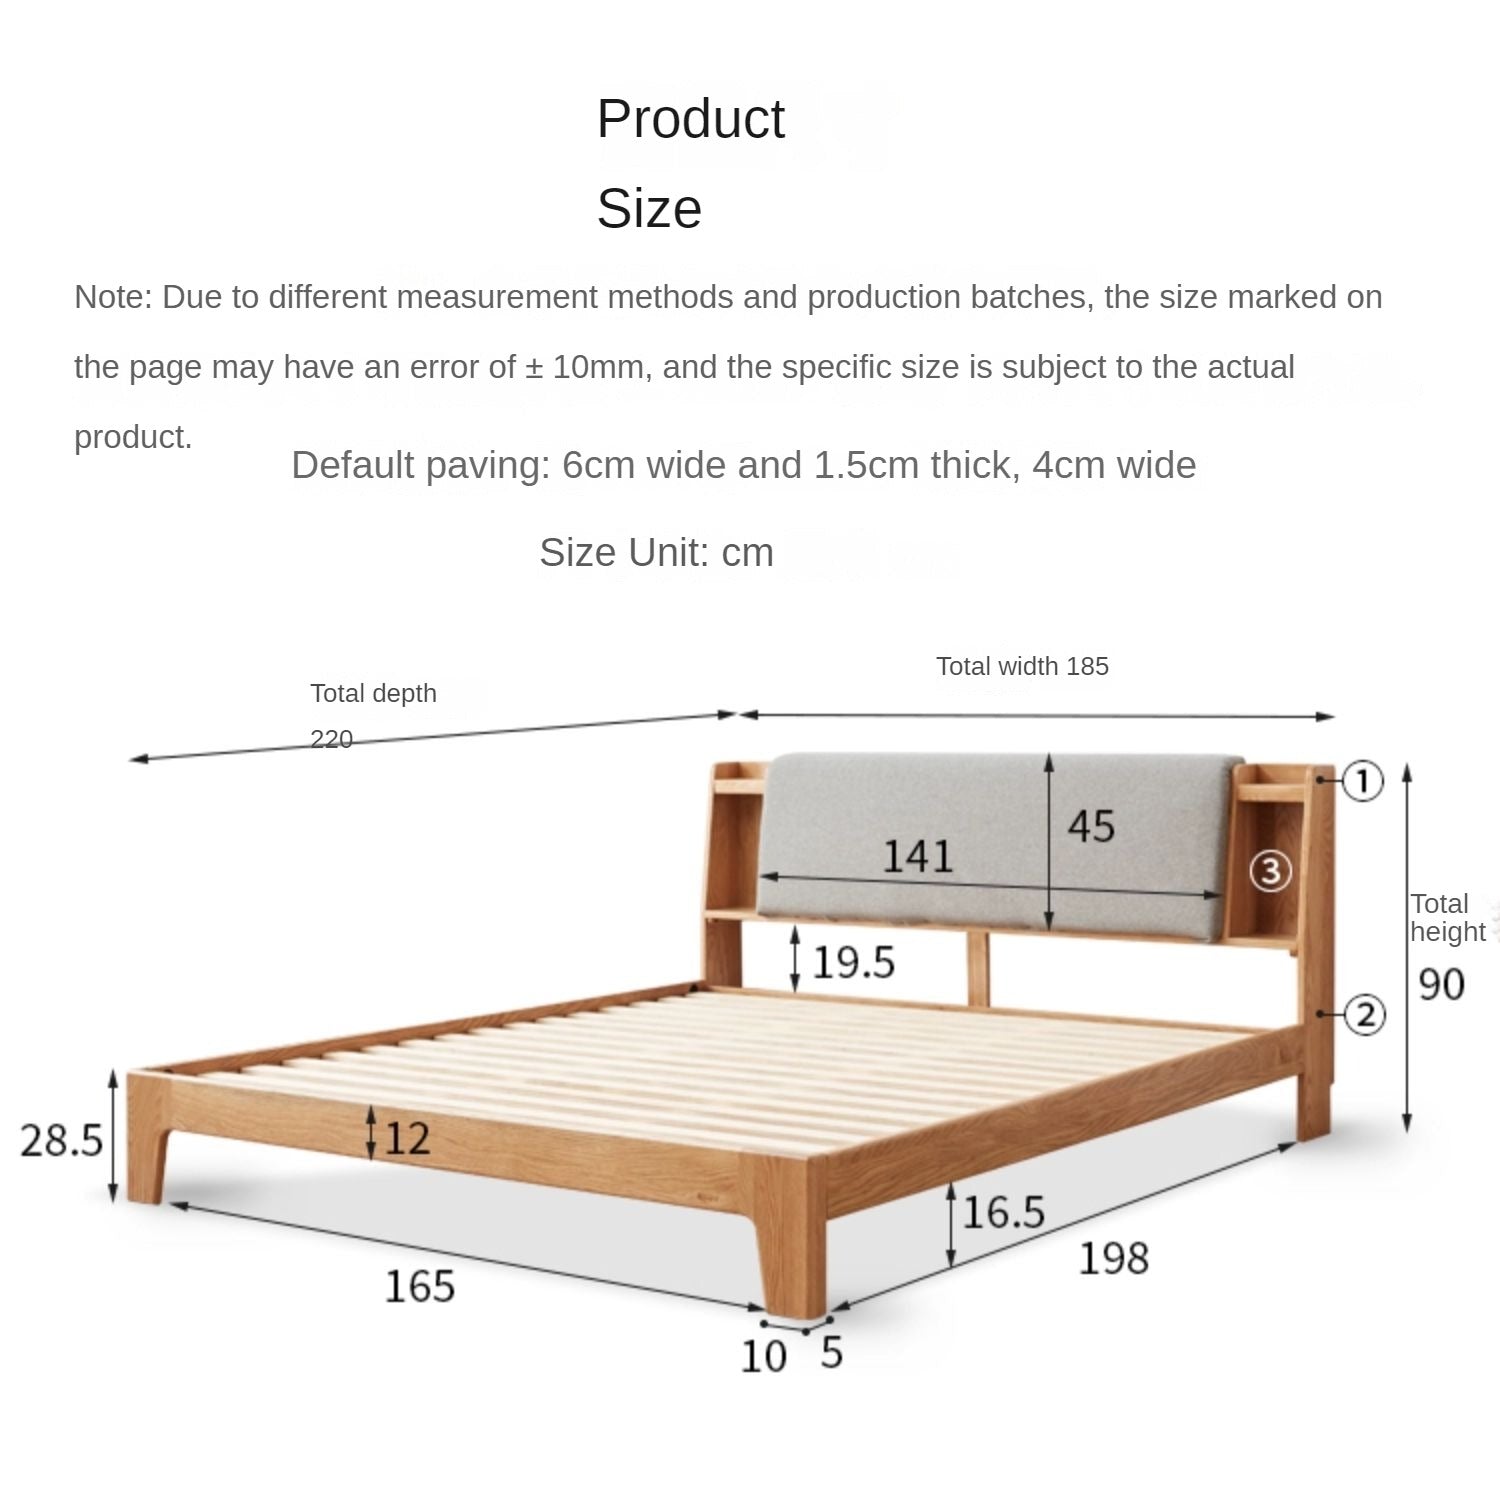 Fabric Bed Oak solid wood with light and shelf"